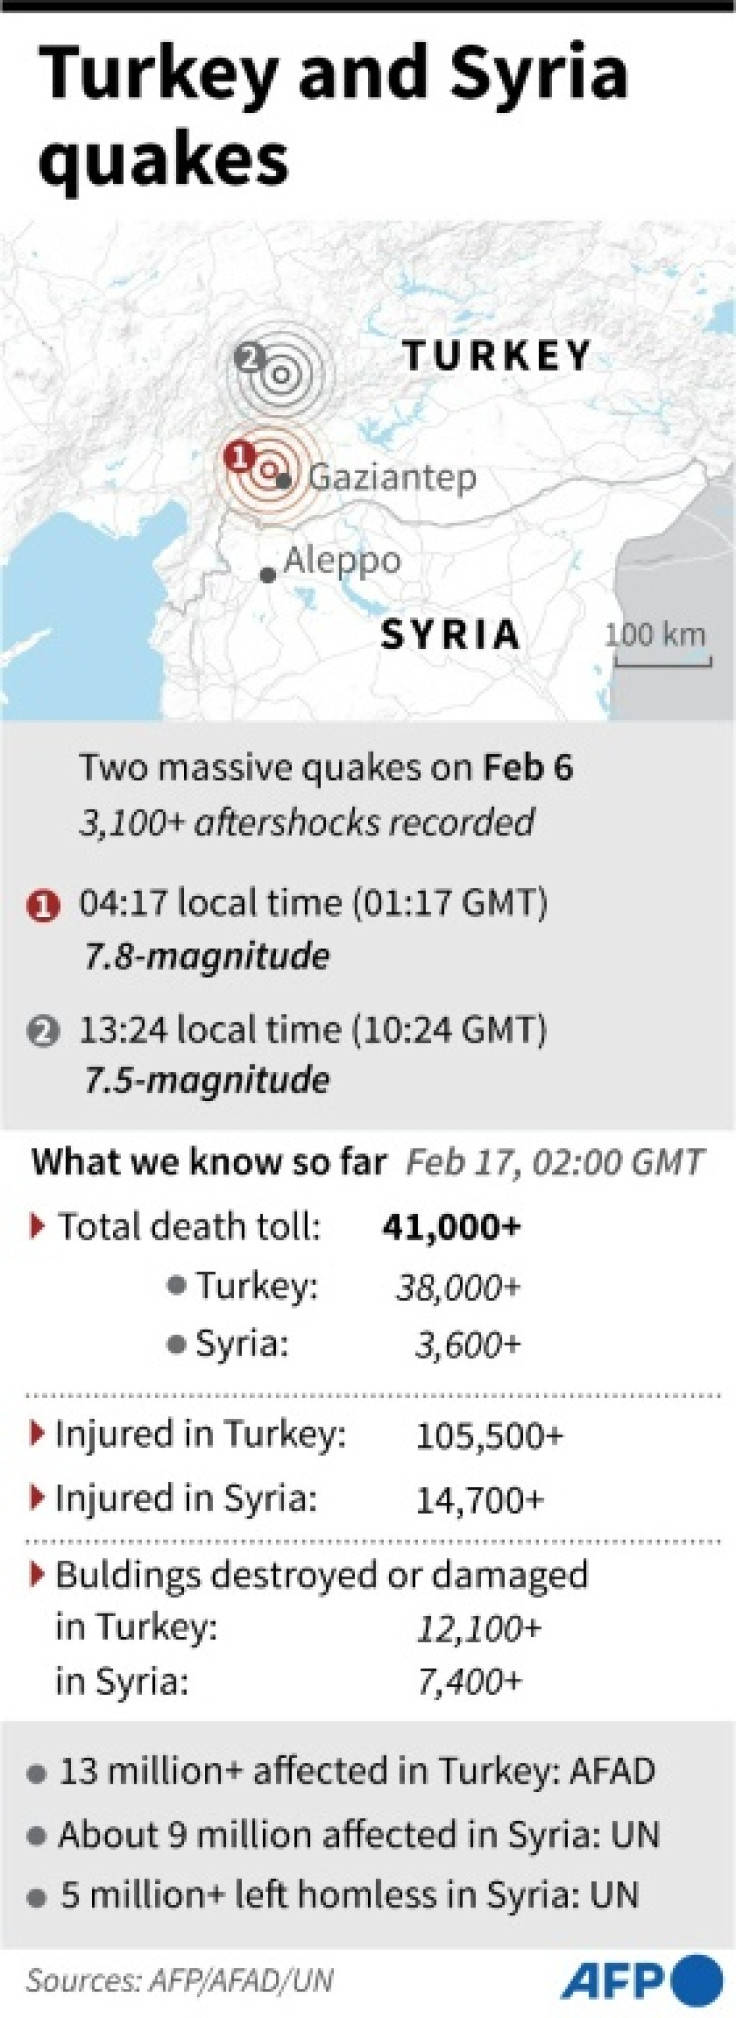 Factfile on what we know so far about the Turkey and Syria February 6 quakes, as of Feb 17, 02:00 GMT.